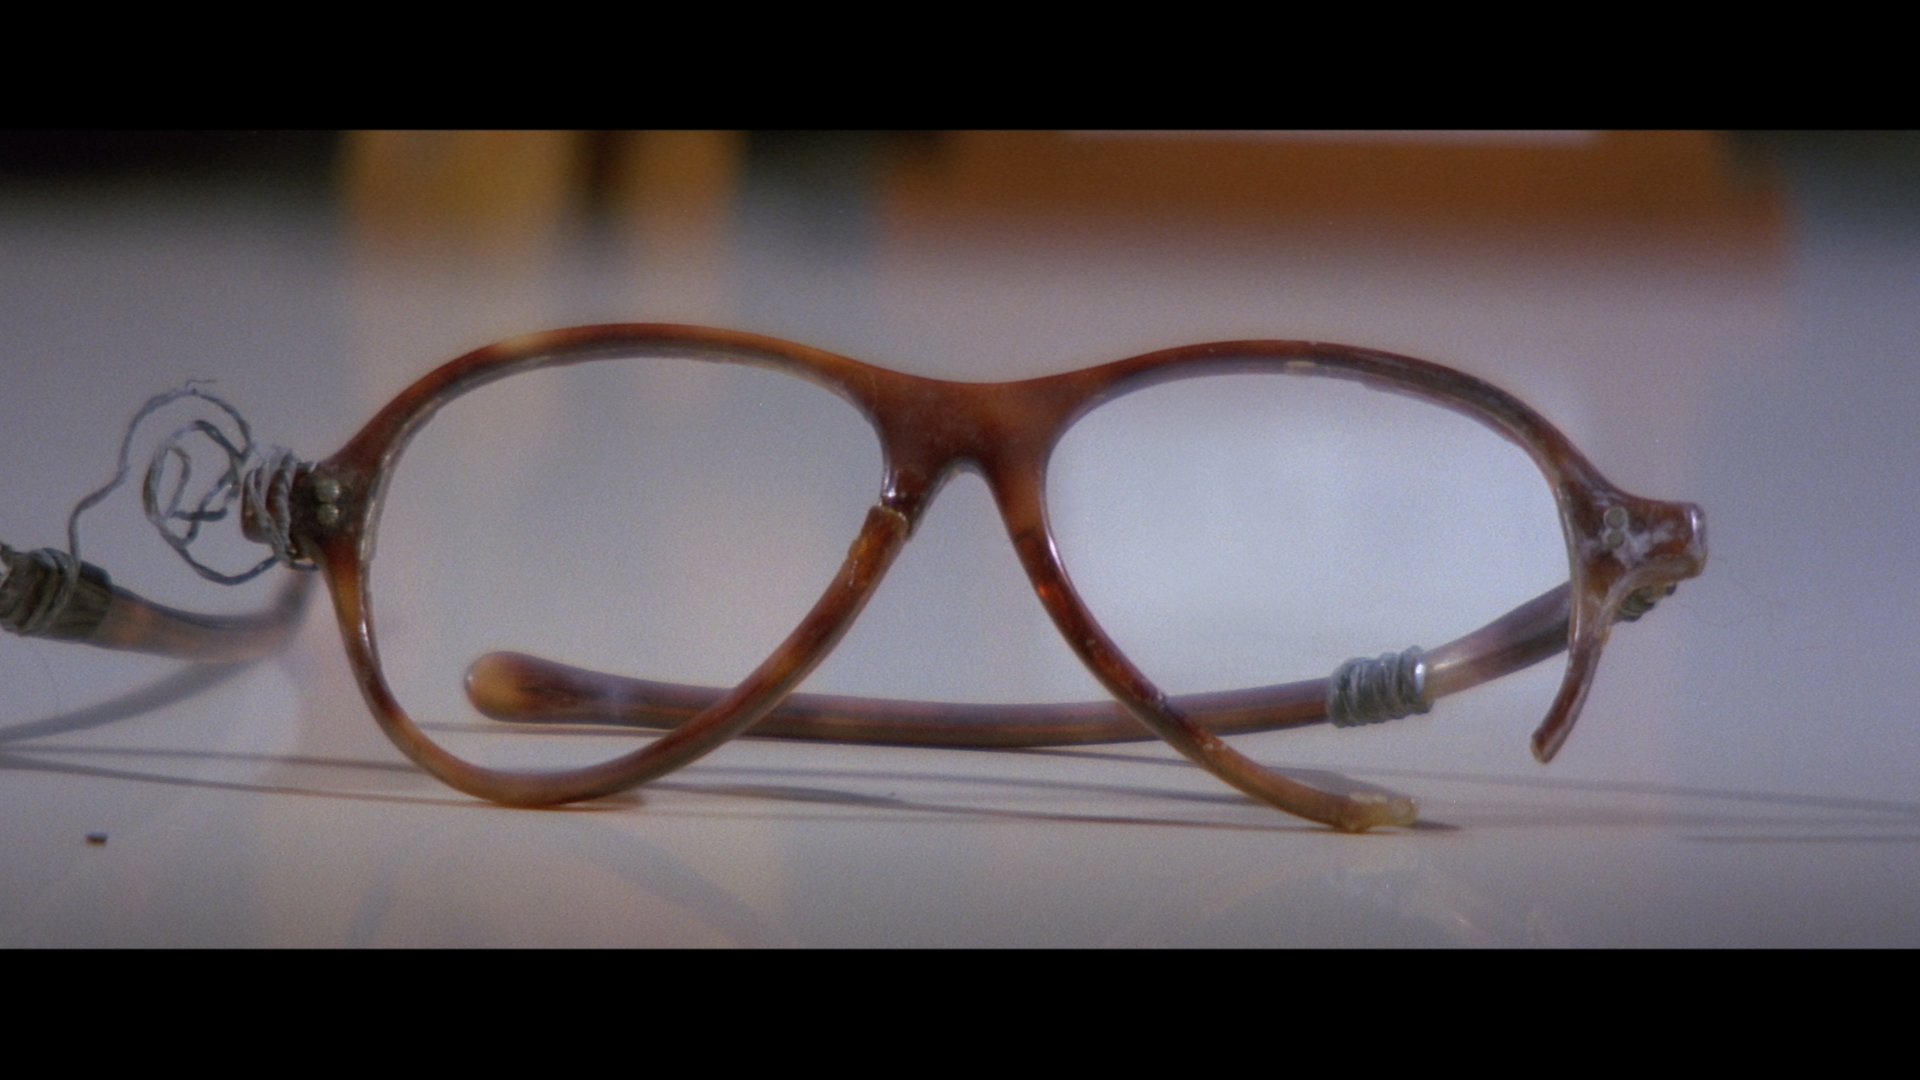 A pair
          of broken glasses that Bruce Lee used for self-motivation